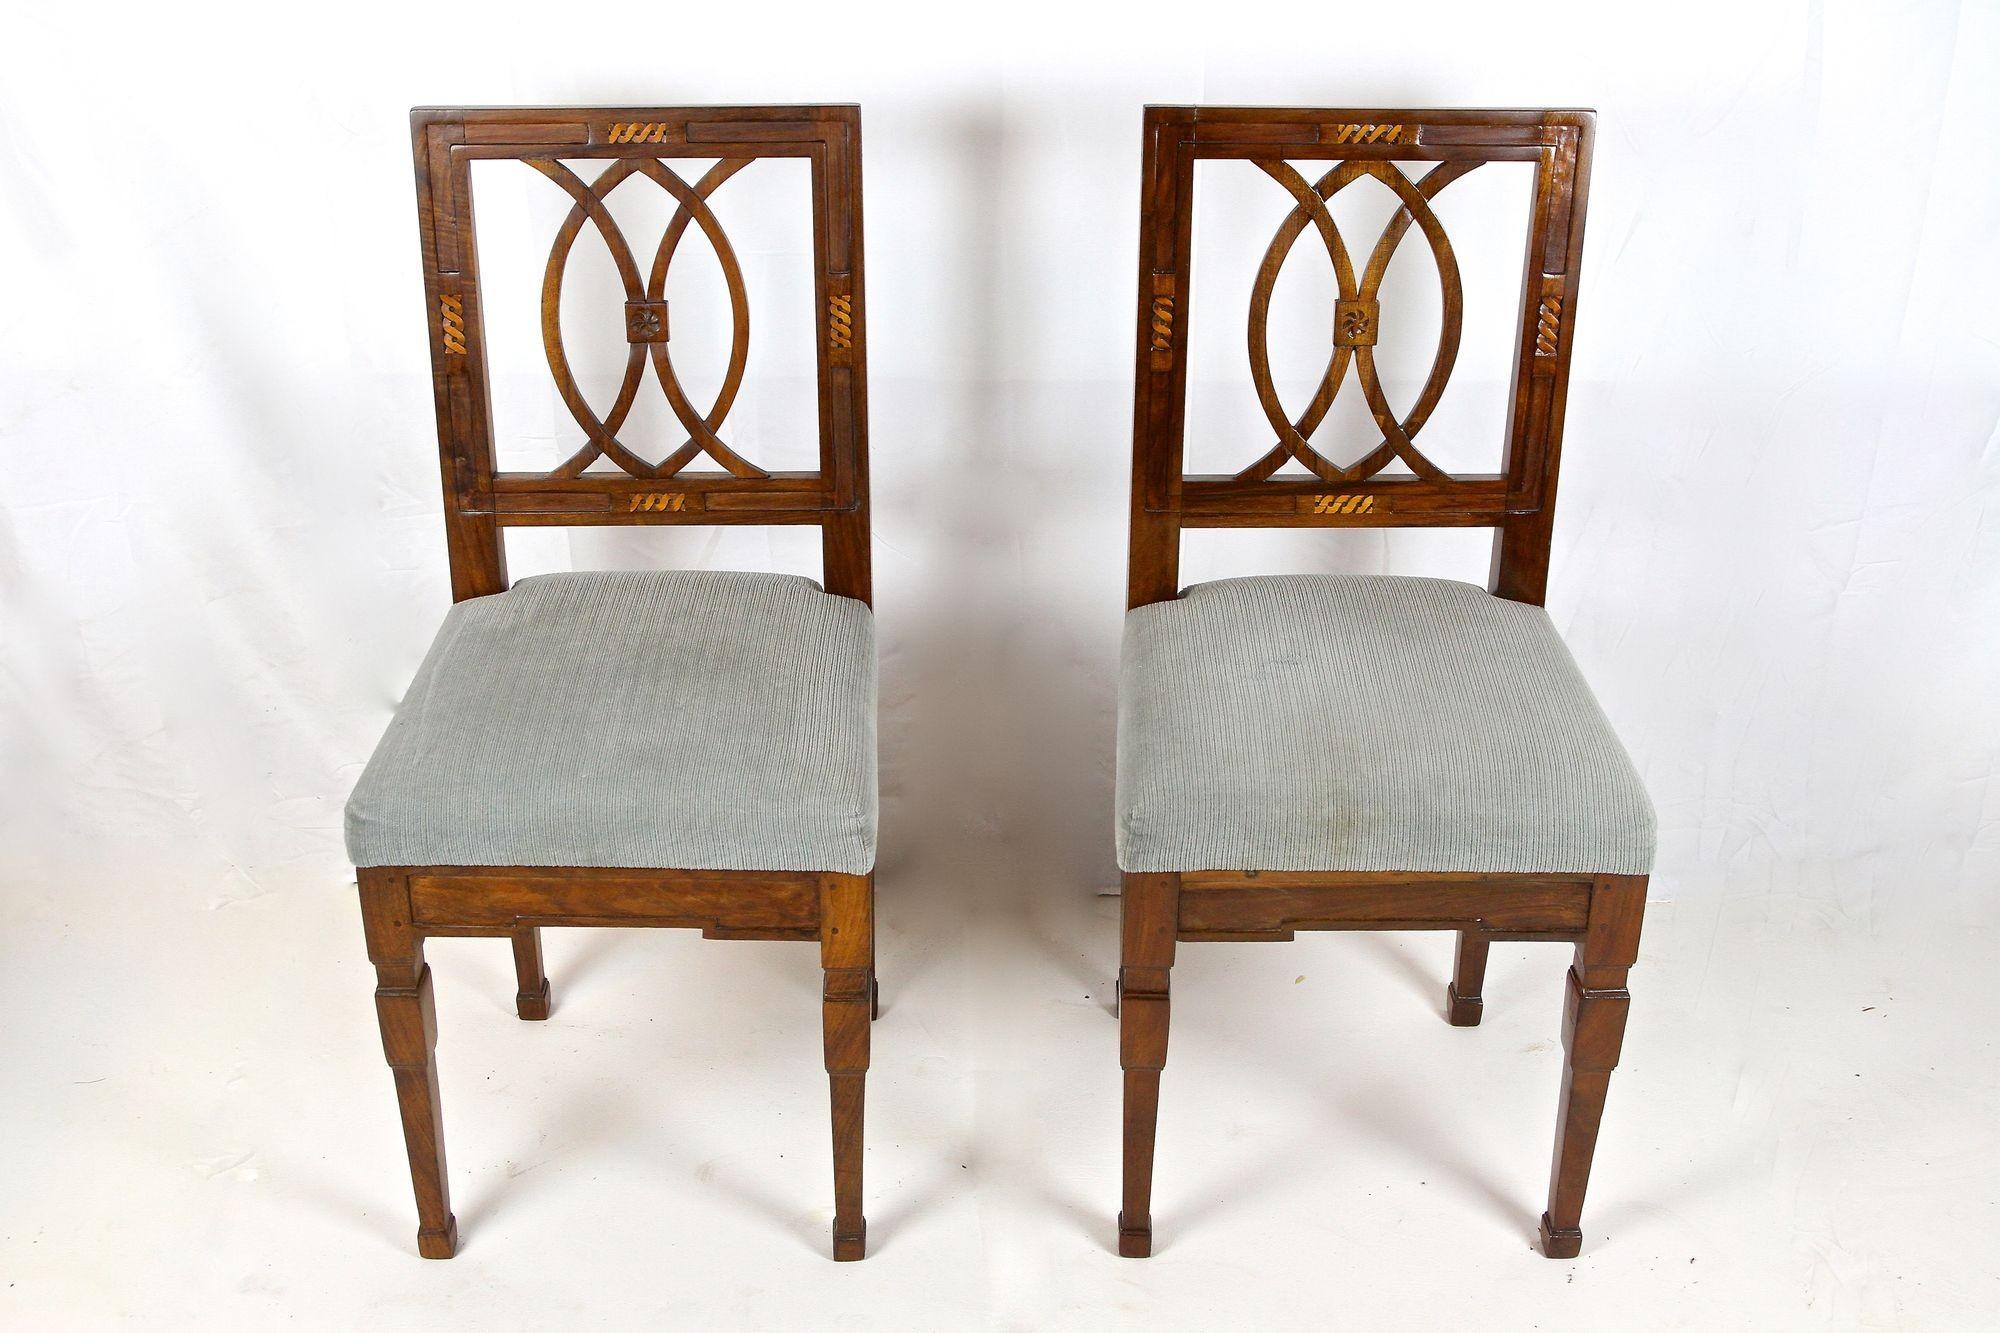 Hand-Carved Pair of 18th Century Nutwood Chairs, Josephinism Period, Austria, Circa 1790